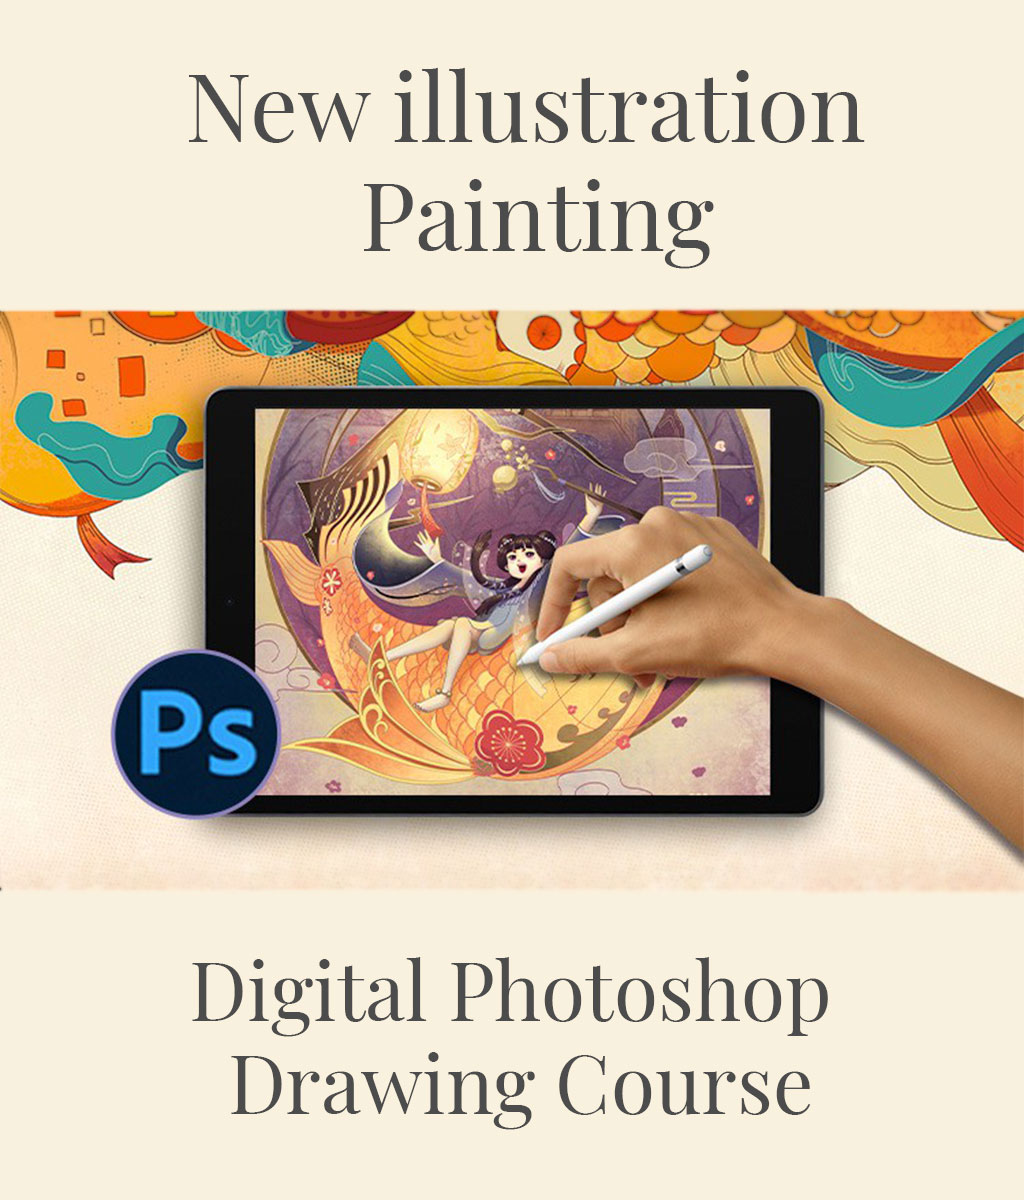 Digital Photoshop Drawing Course